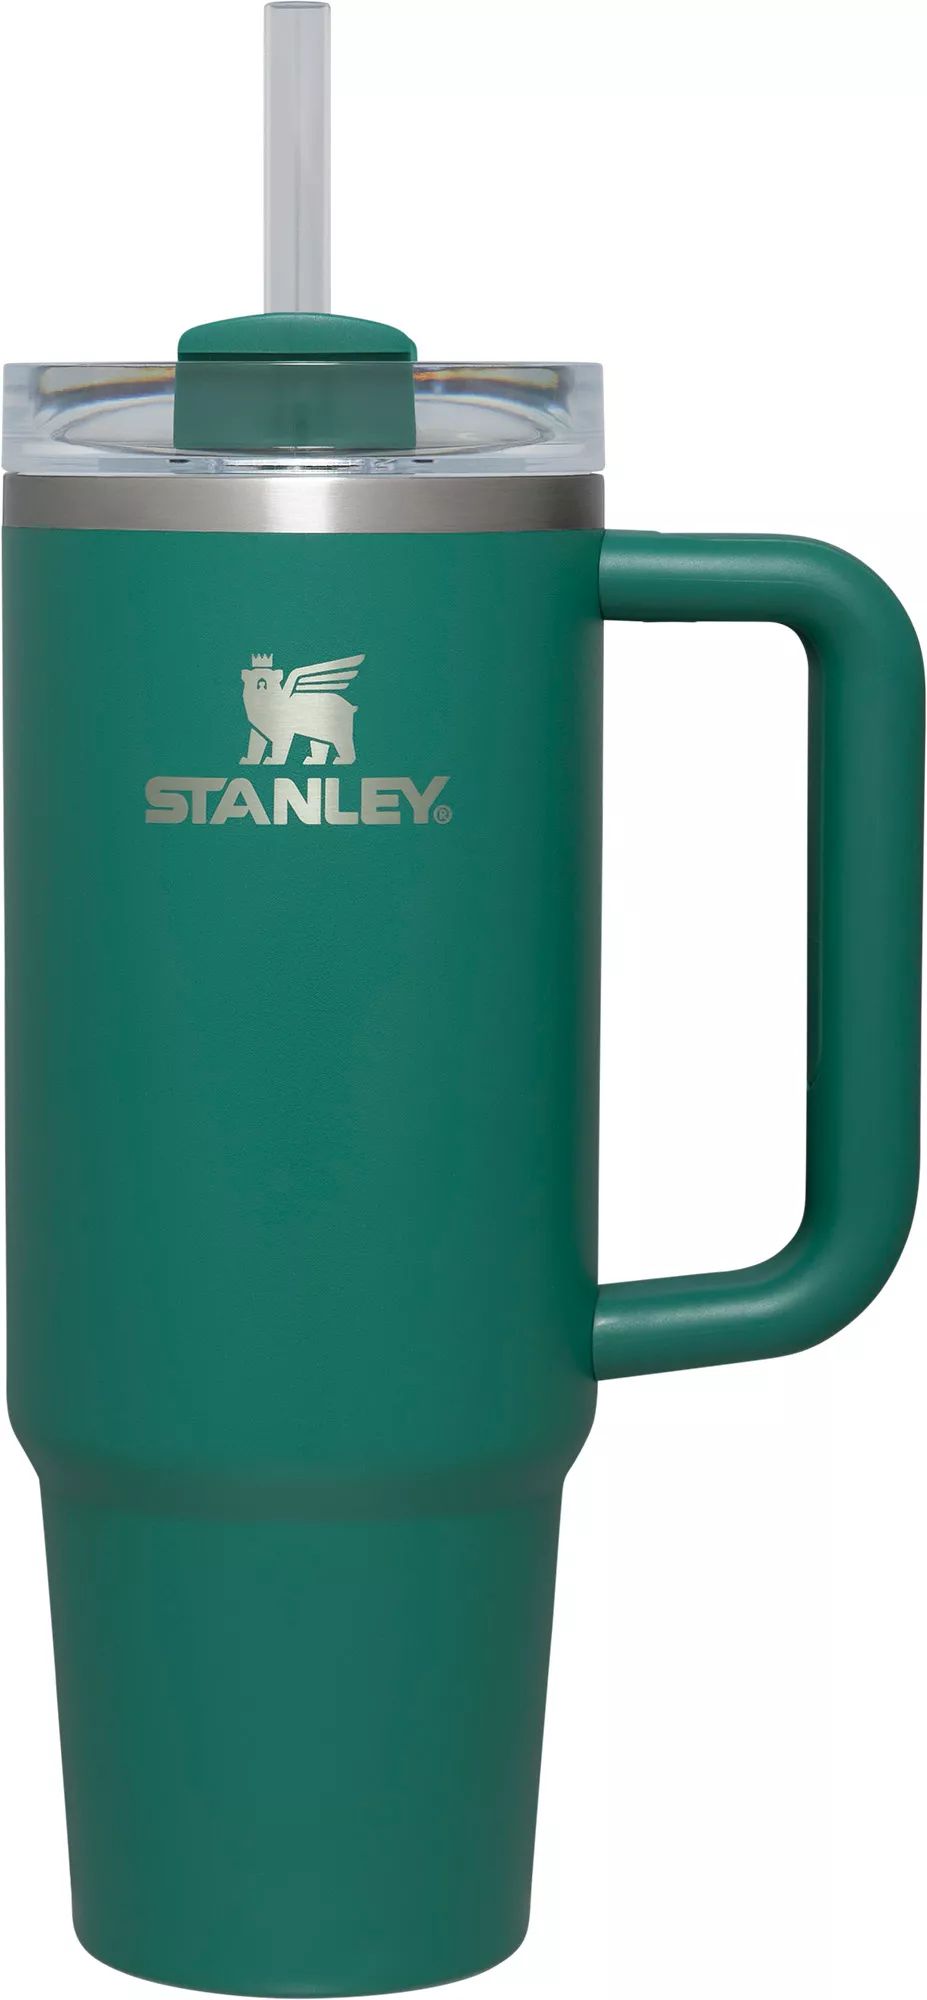 Stanley 30 oz. Quencher H2.0 FlowState Tumbler | Dick's Sporting Goods | Dick's Sporting Goods